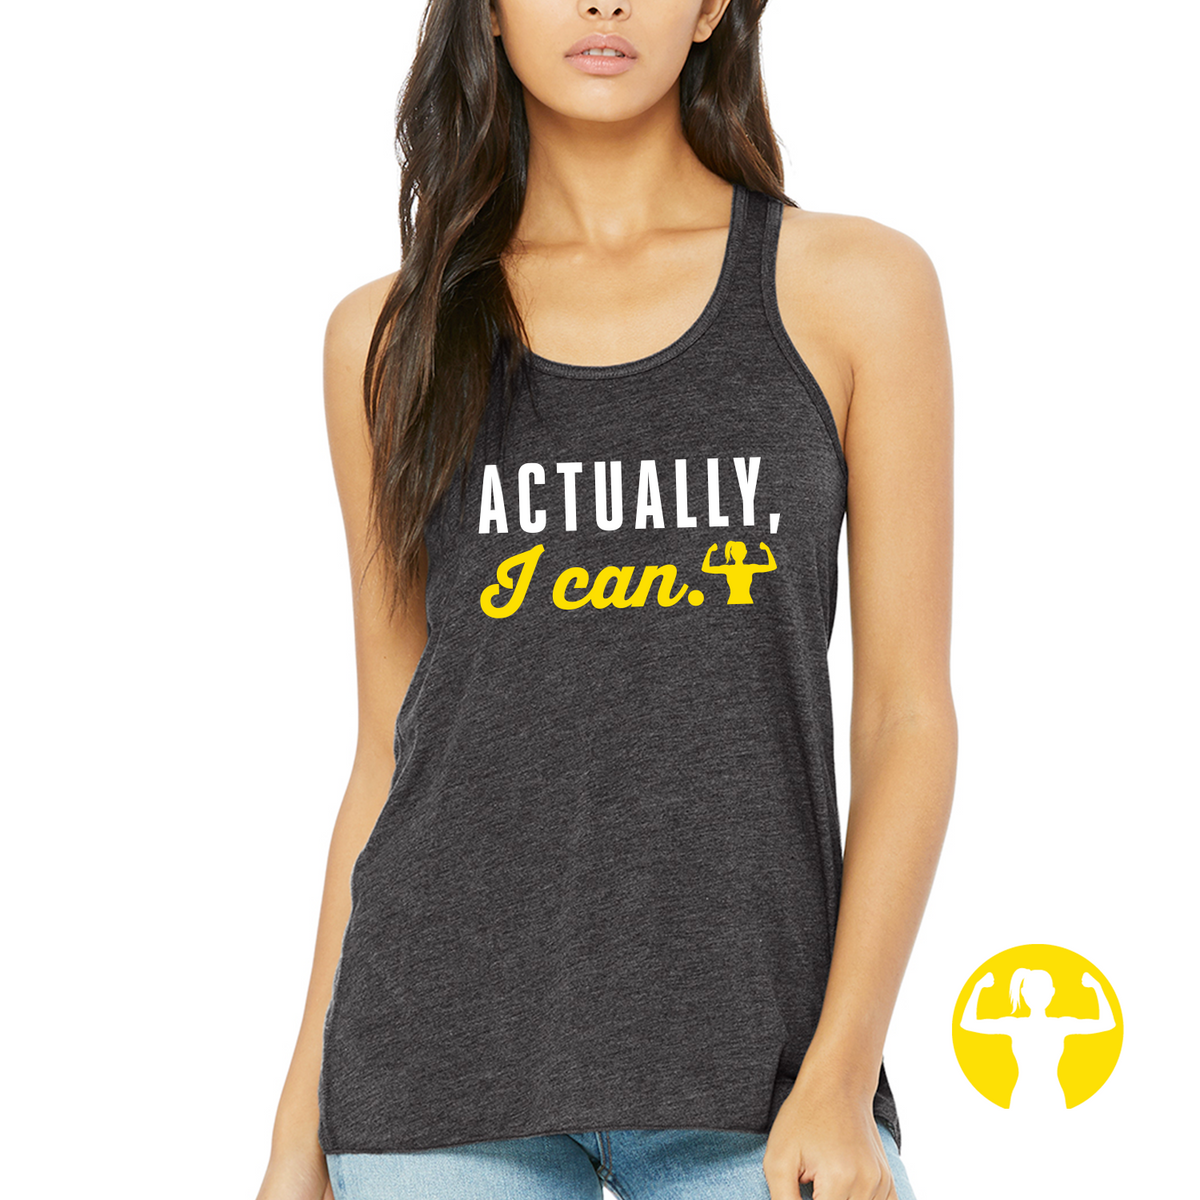 I Don't Always Wear Black, Sometimes I Wear Nothing Tank Top Racerback.  Cute Sassy Girls Women Saying Quotes Fitness -  Sweden